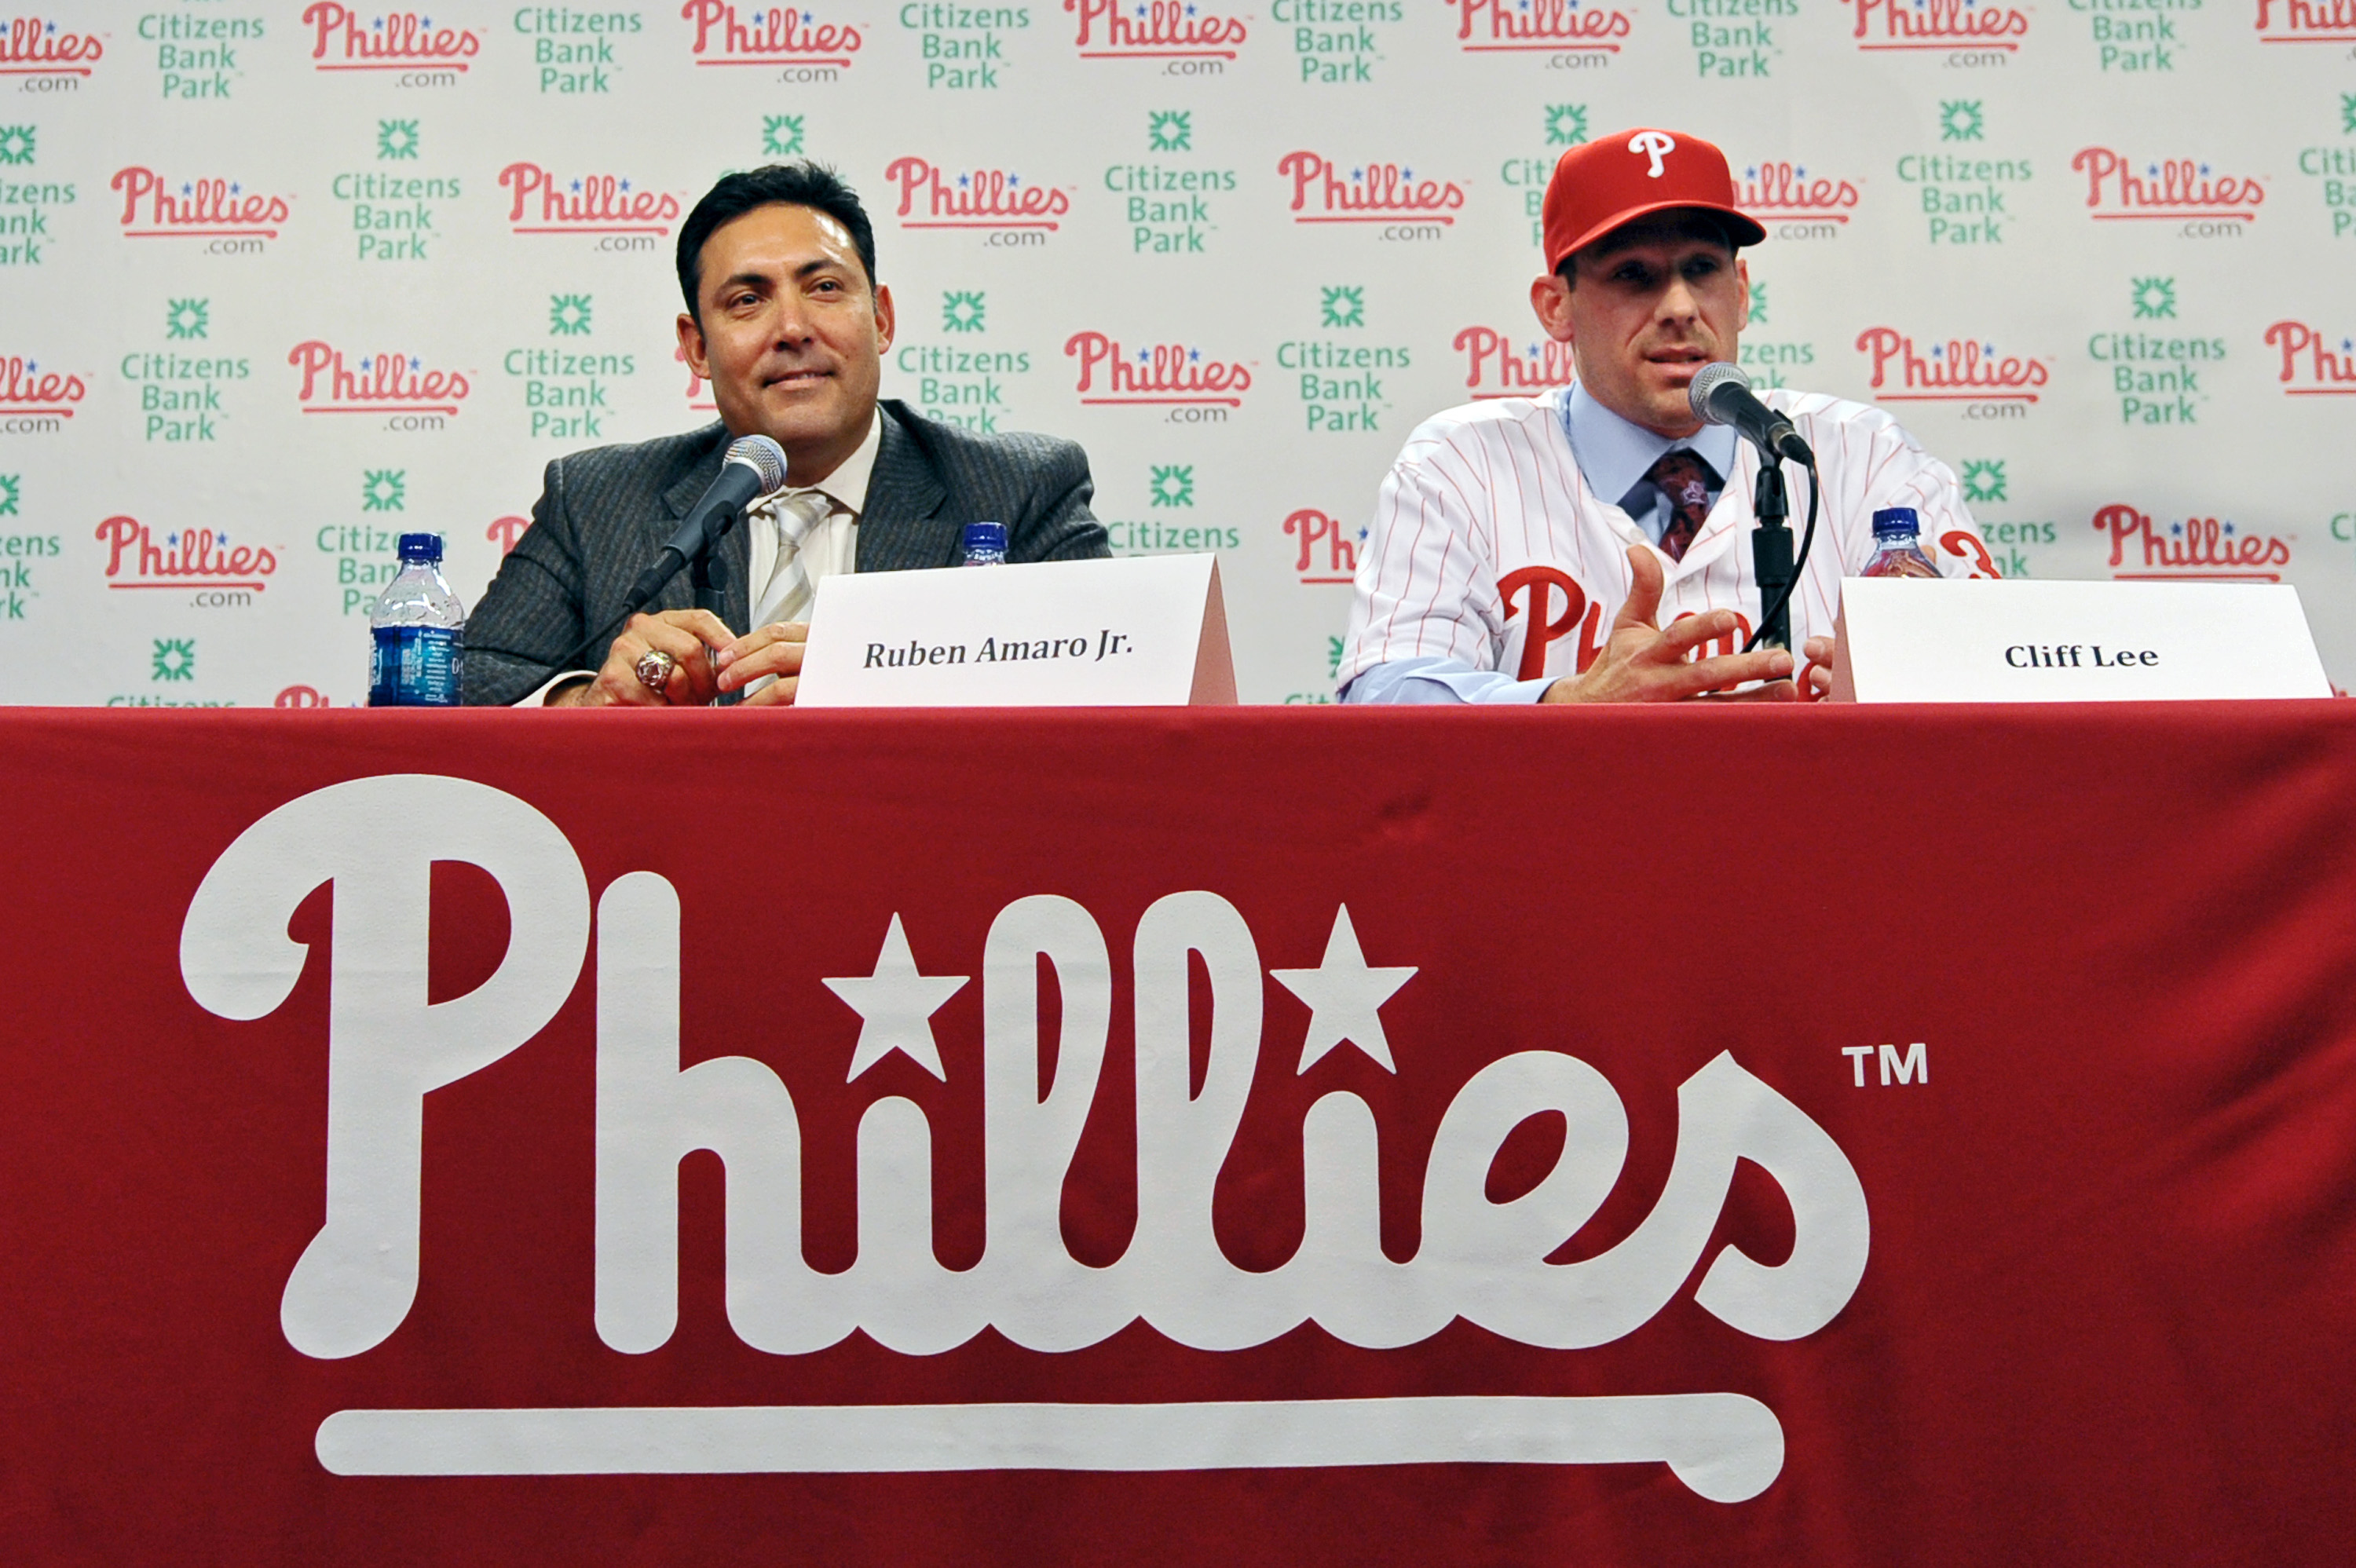 PHILADELPHIA - DECEMBER 15: Pitcher Cliff Lee #33 of the Philadelphia Phillies talks with the media while general manager Ruben Amaro Jr. watches during a press conference at Citizens Bank Park on December 15, 2010 in Philadelphia, Pennsylvania. (Photo by